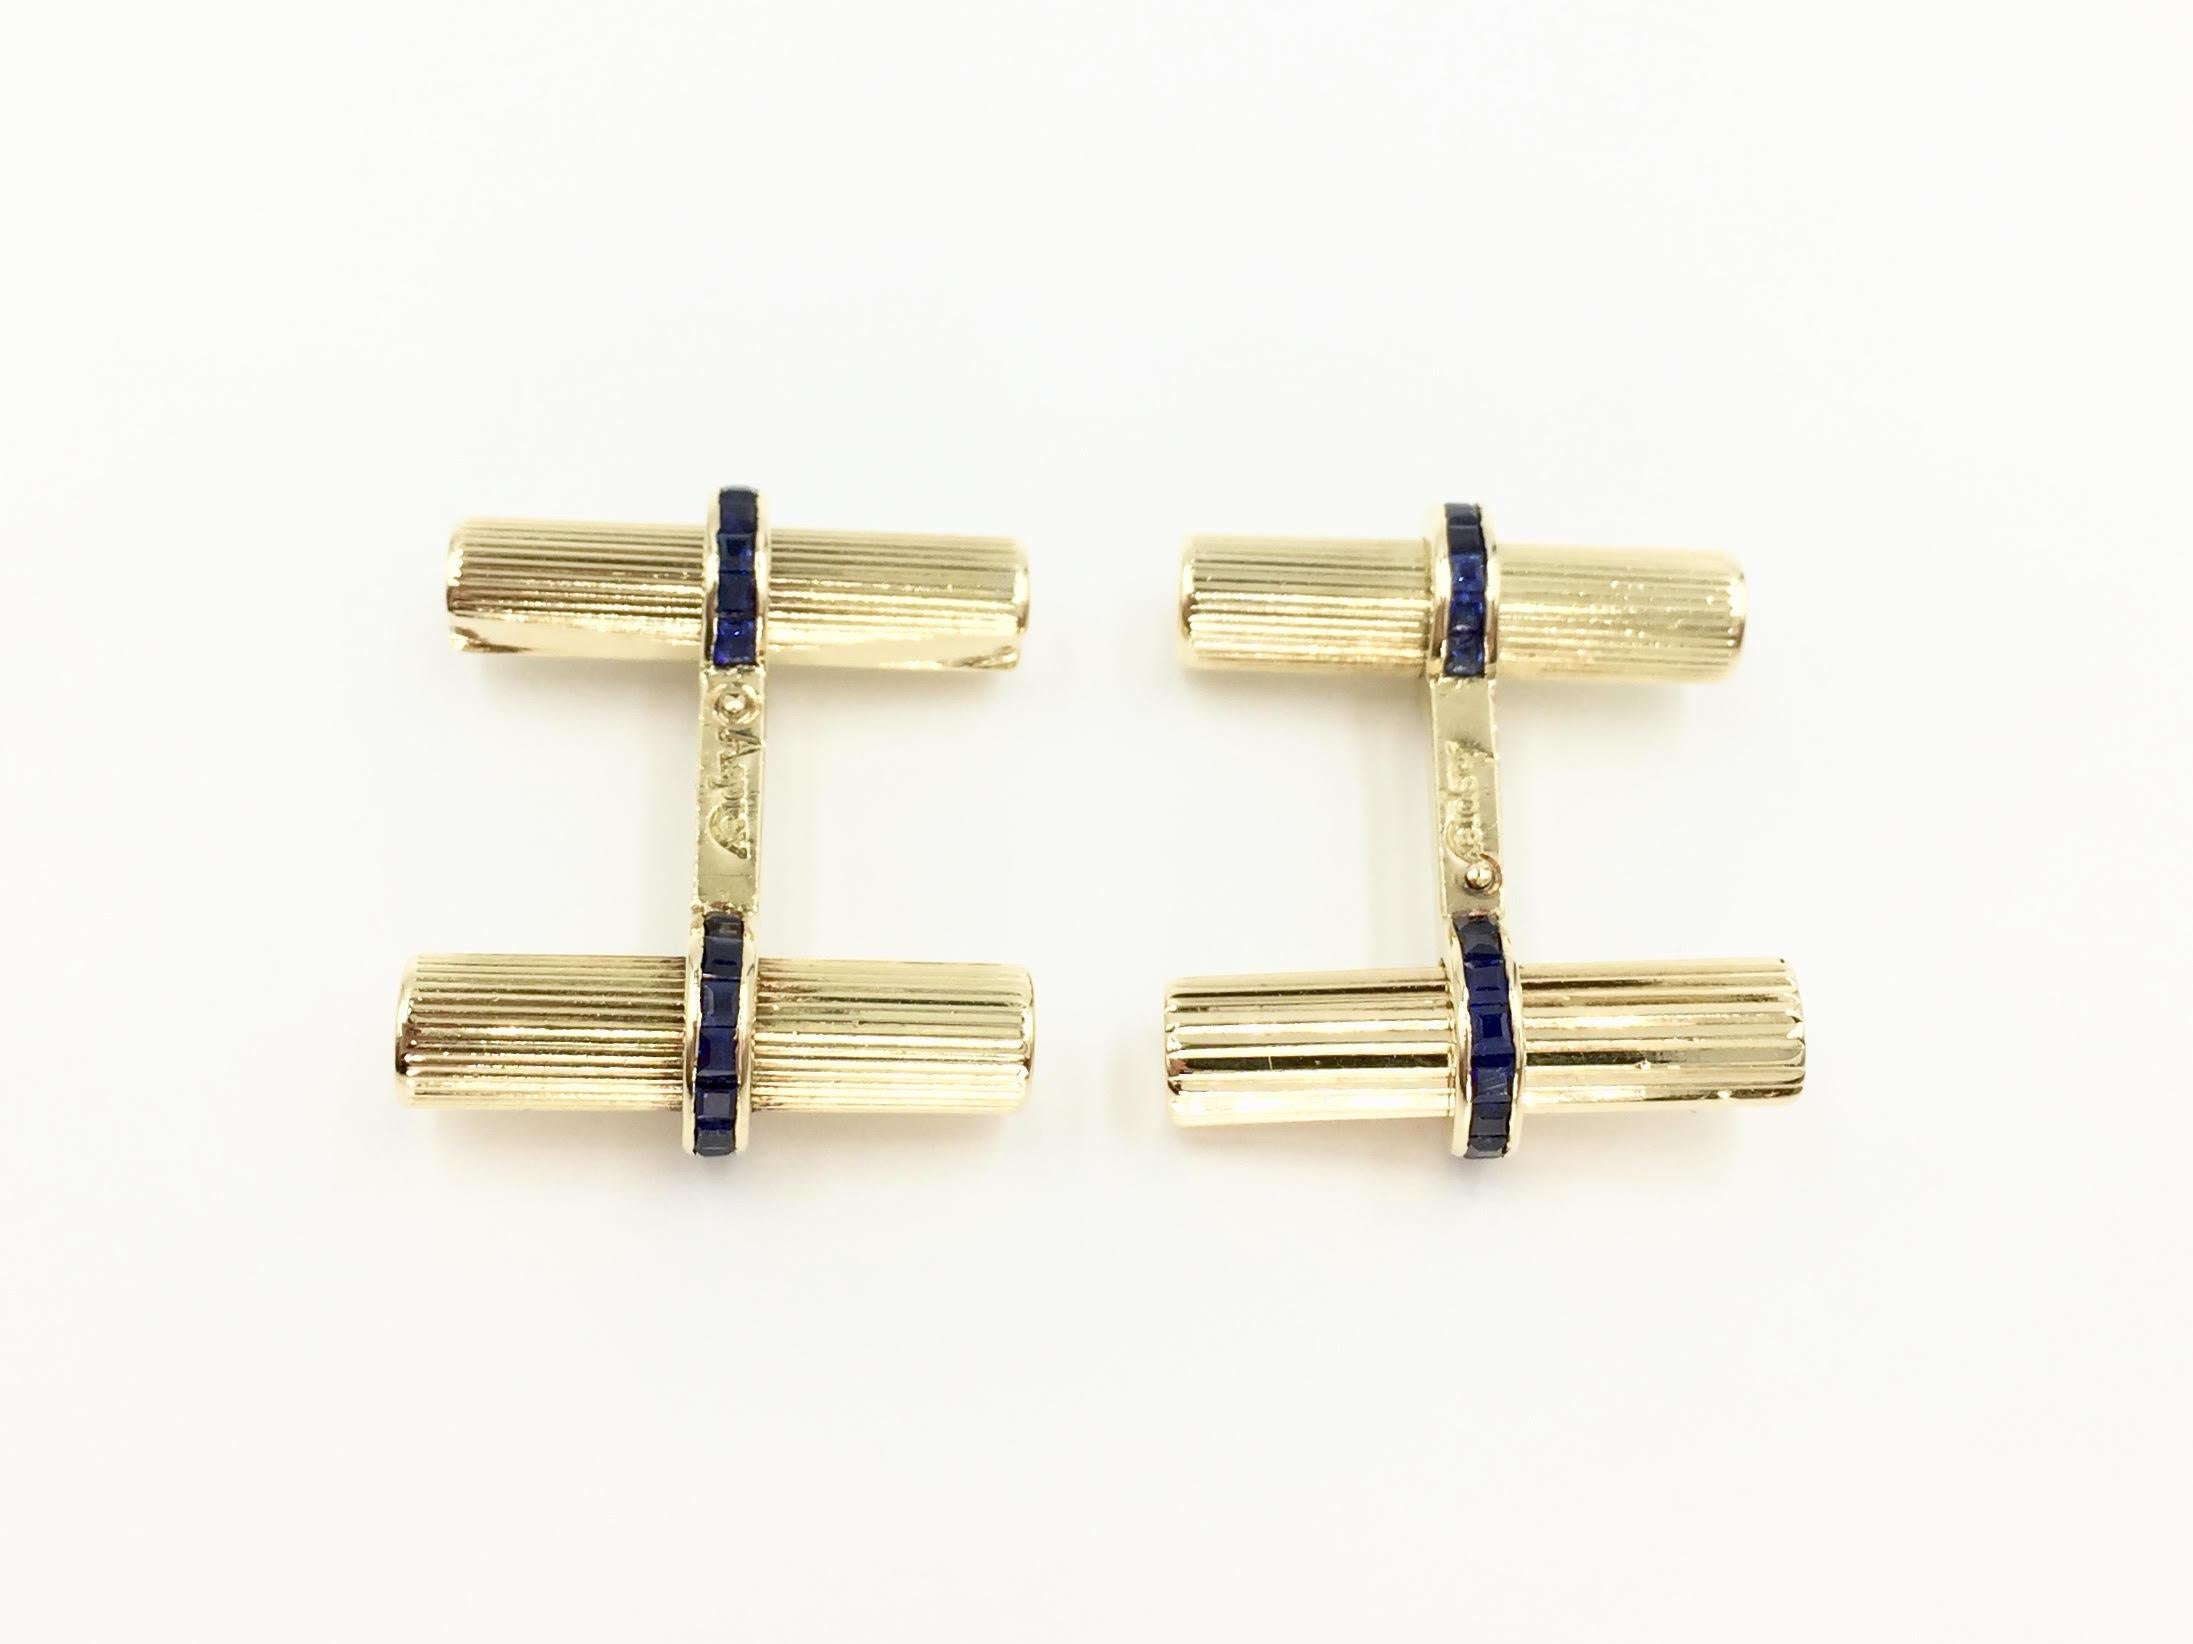 Signed Asprey solid 18 karat yellow gold cuff links featuring beautiful quality channel set french cut sapphires, circa 1940. Each tubular bar of the cuff link is expertly grooved giving these an extraordinary sheen, reflecting light beautifully.